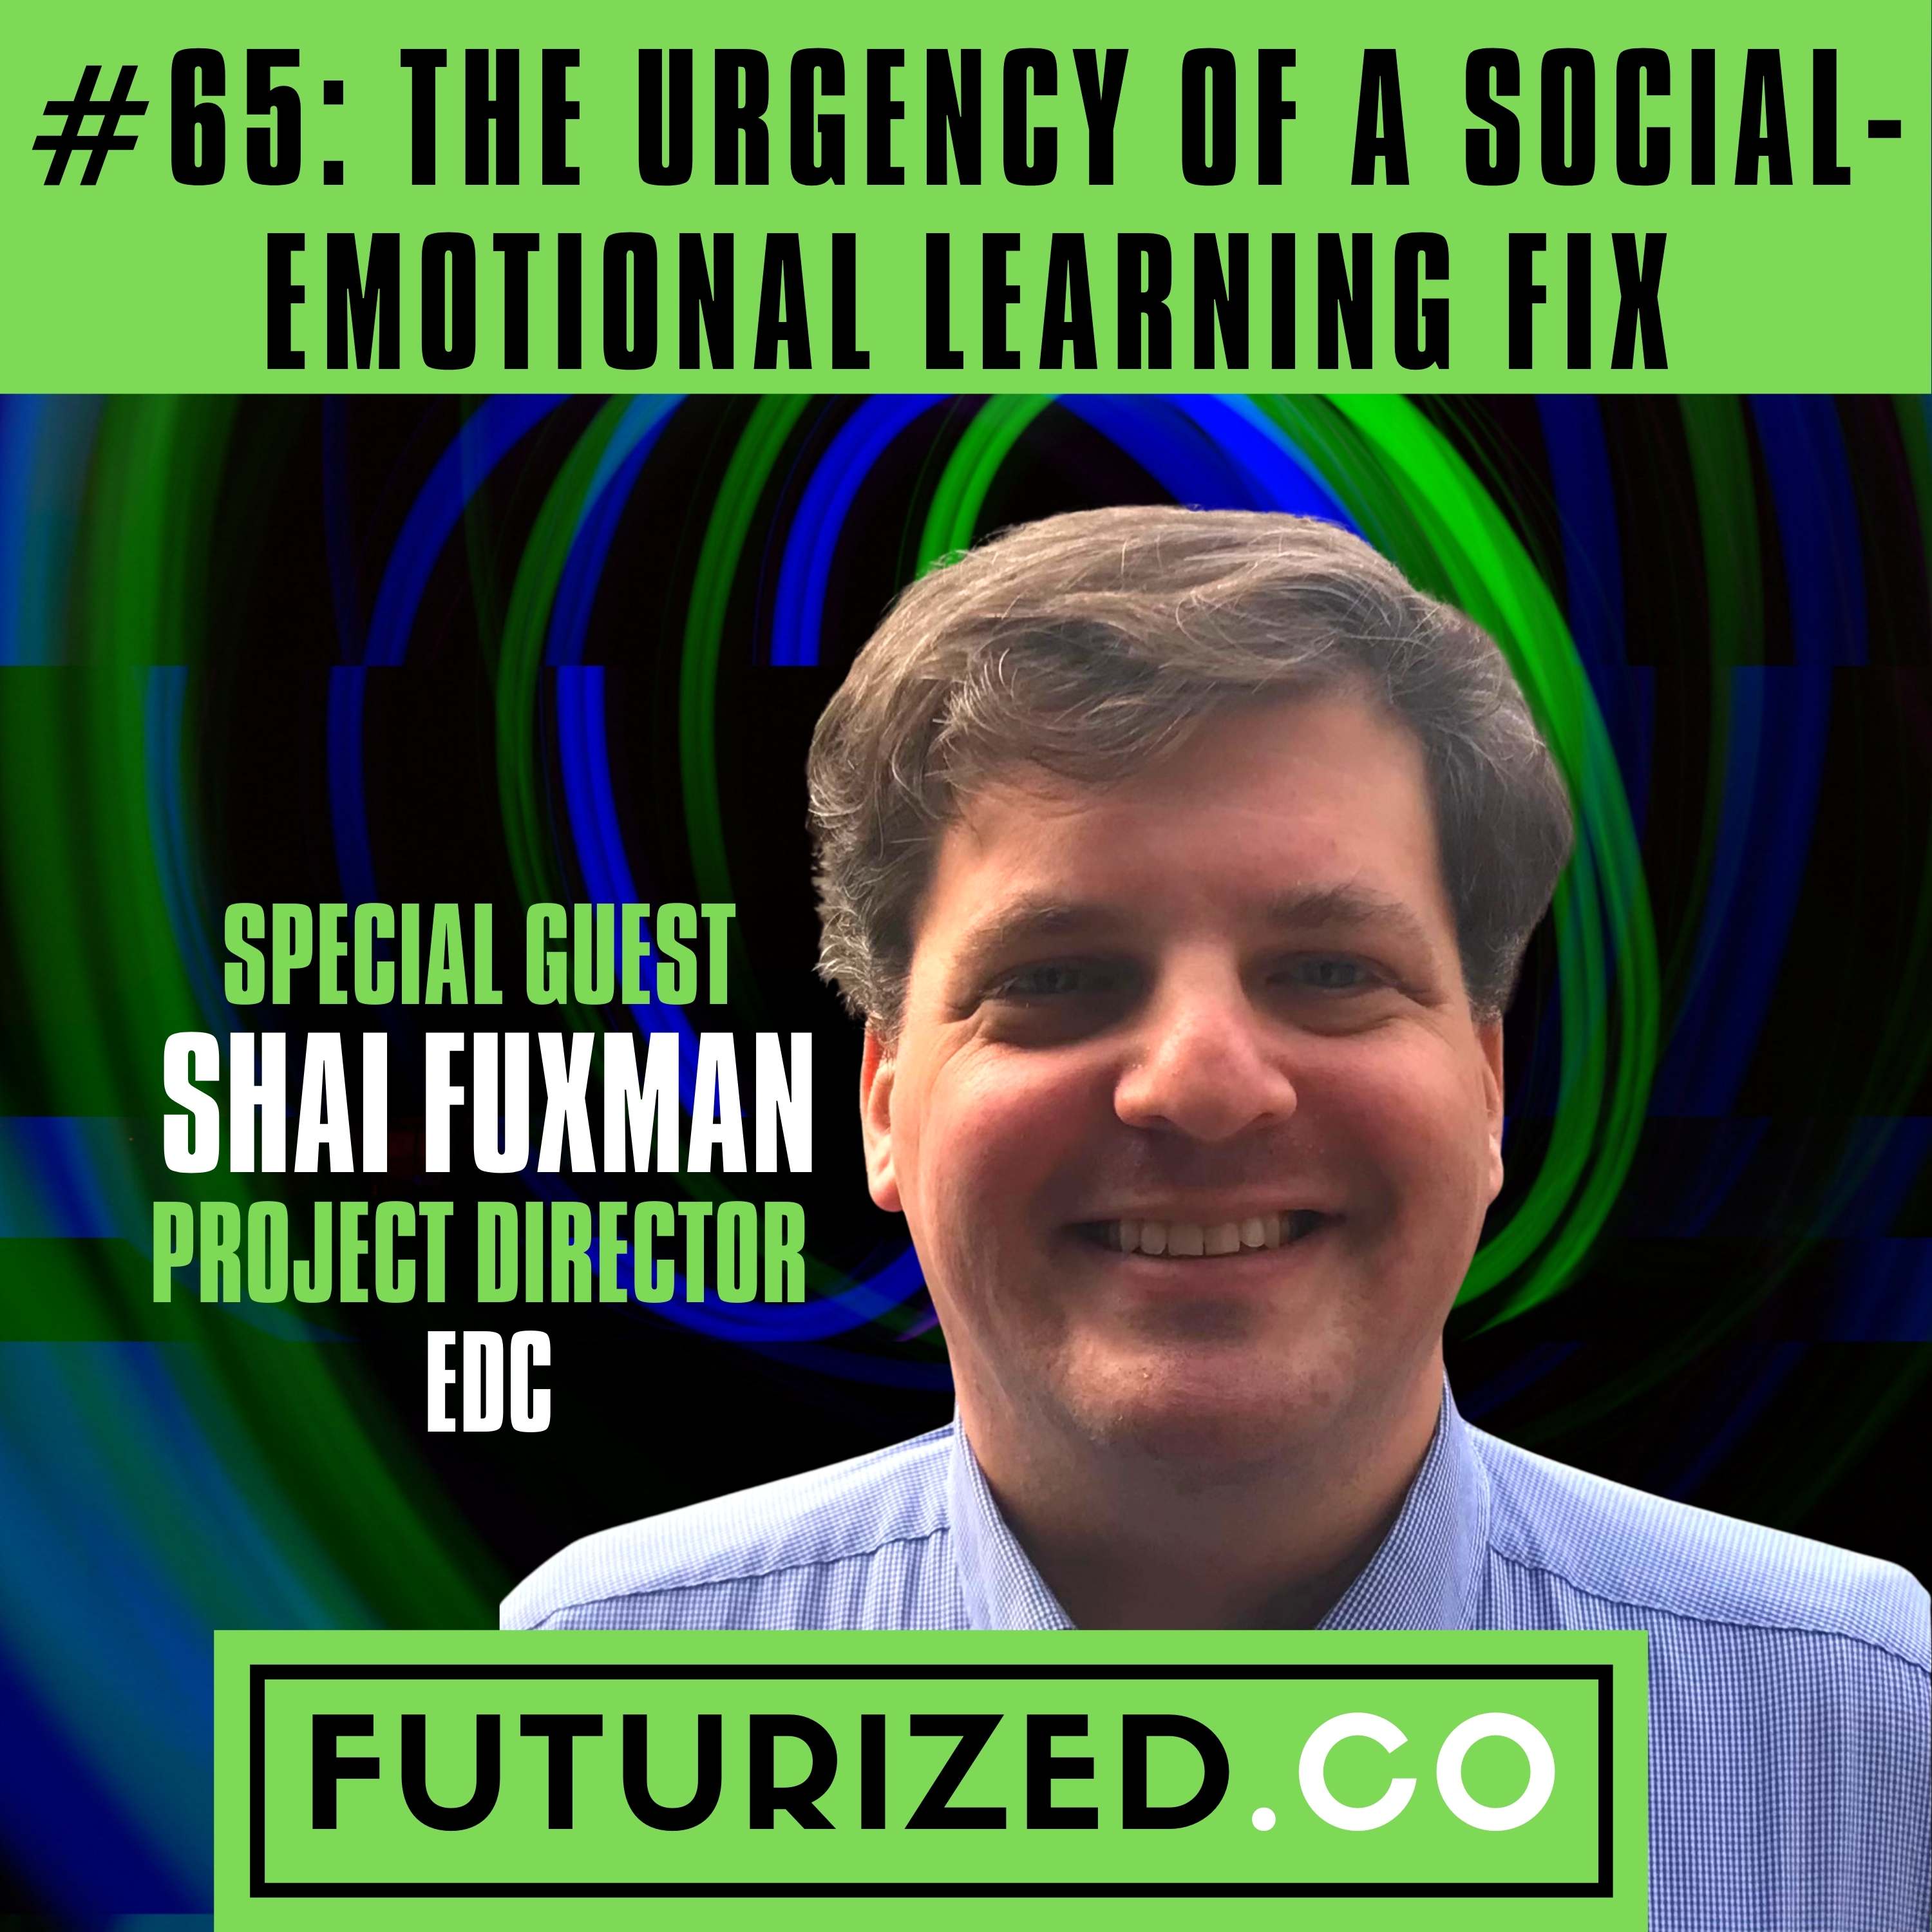 The Urgency of a Social-Emotional Learning Fix Image